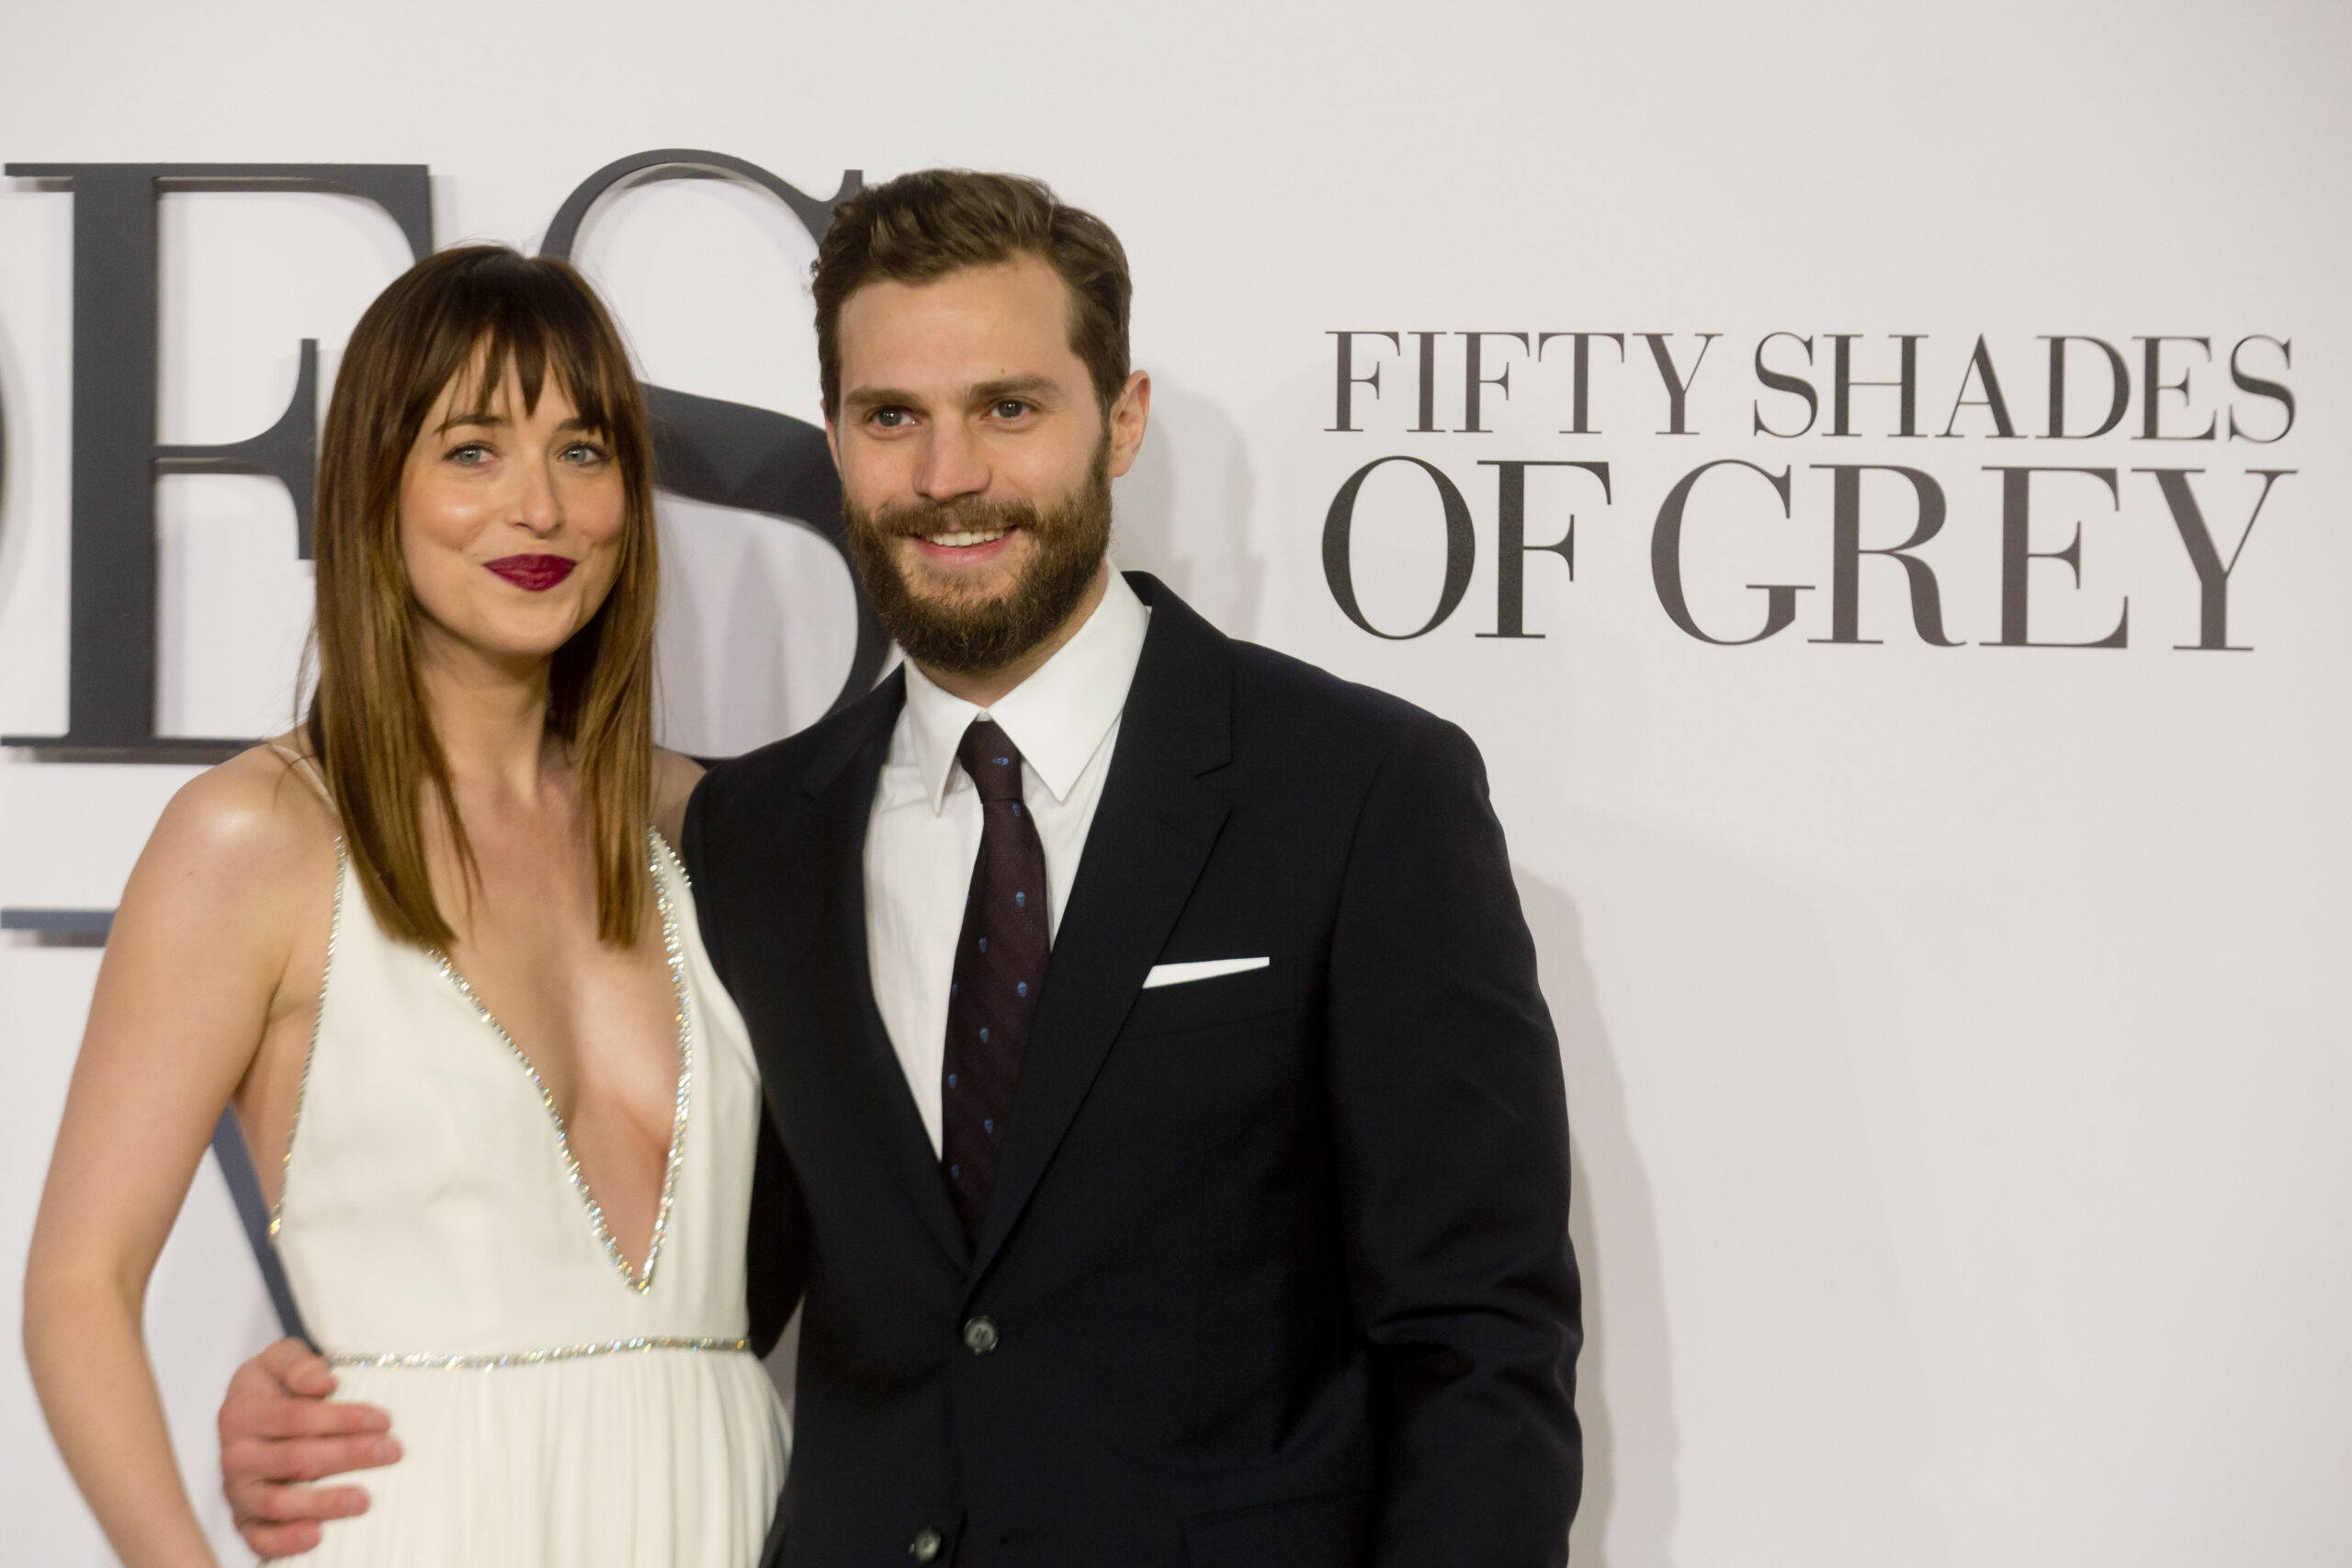 '50 Shades of Grey' Ending Explained: What the Film Says About BDSM Culture